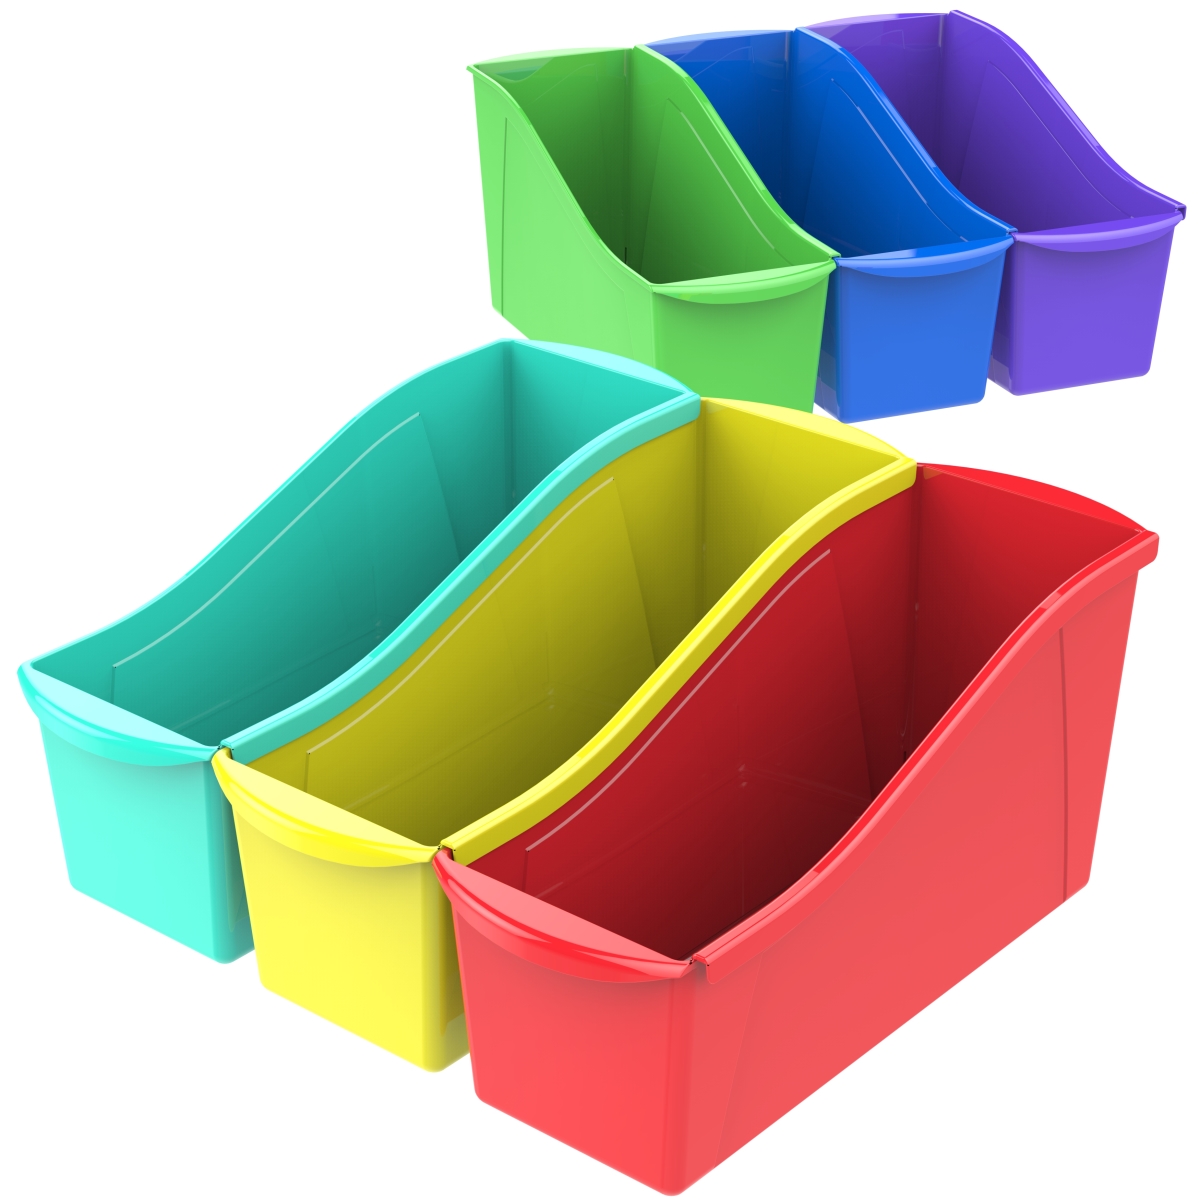 Picture of Storex 70110U06C Large Book Bin, Assorted Color - Pack of 6